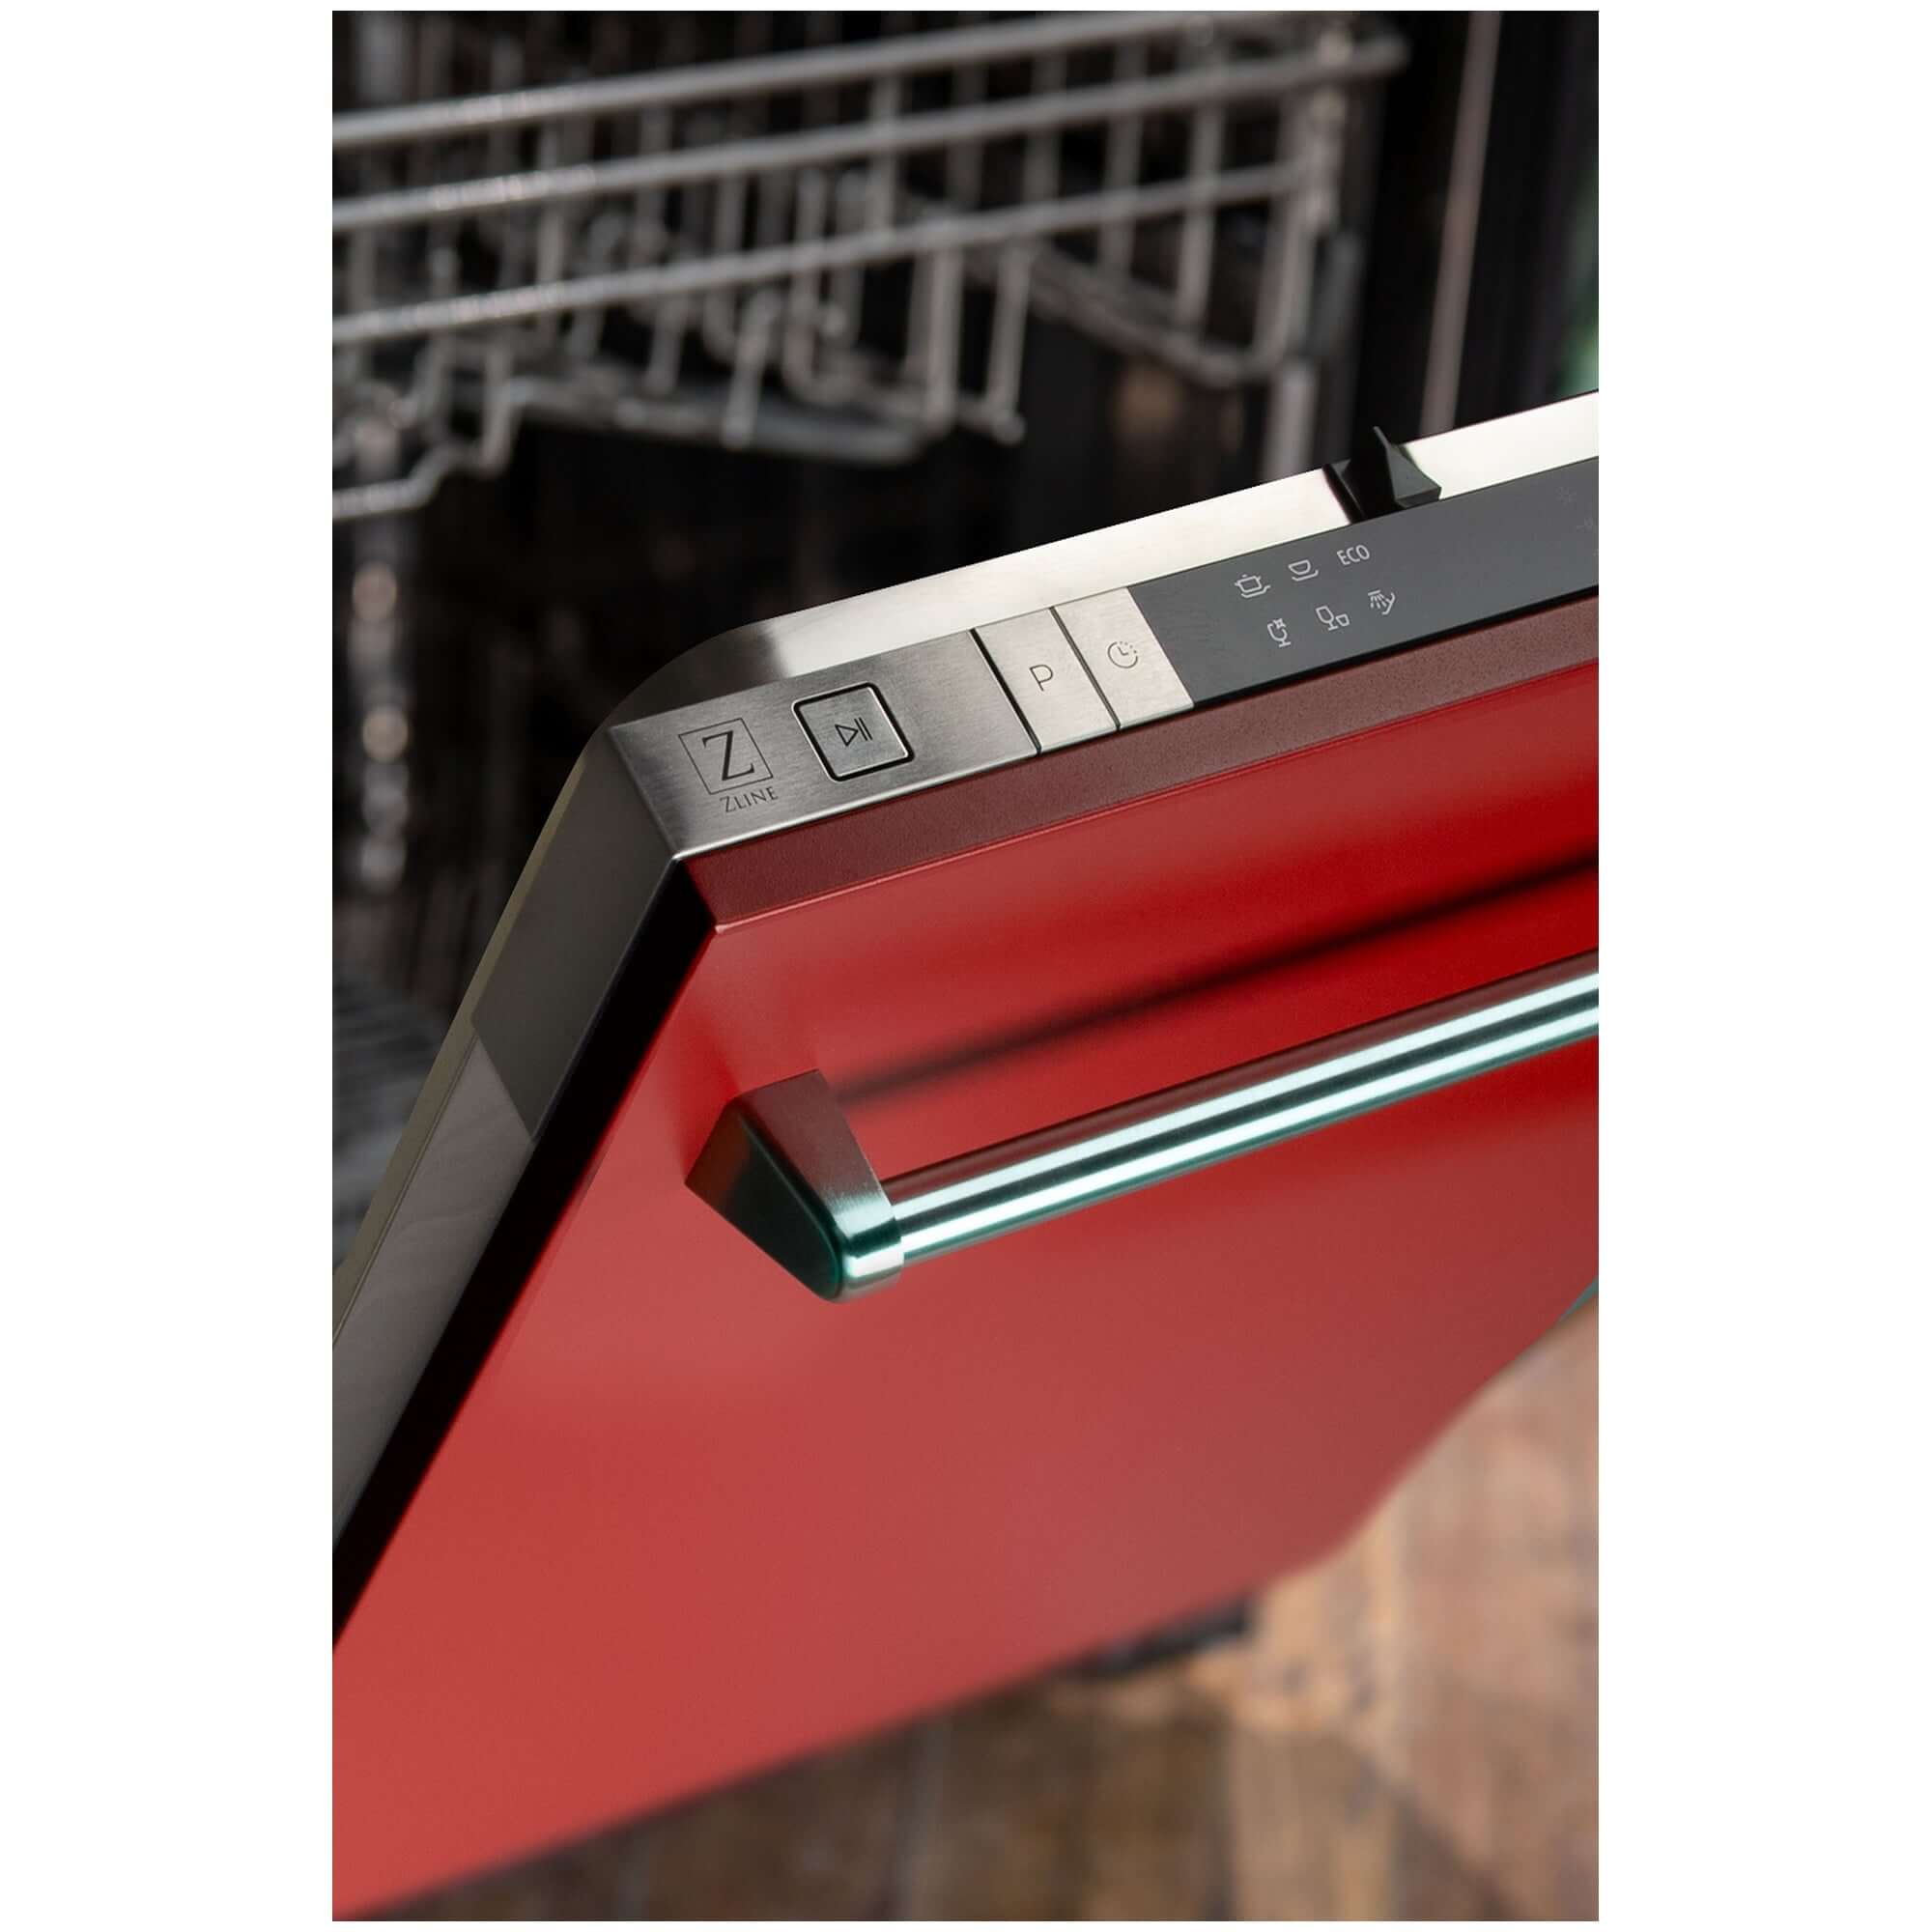 ZLINE 18 in. Compact Red Matte Top Control Built-In Dishwasher with Stainless Steel Tub and Traditional Style Handle, 52dBa (DW-RM-18) built-in to cabinets in a luxury kitchen.